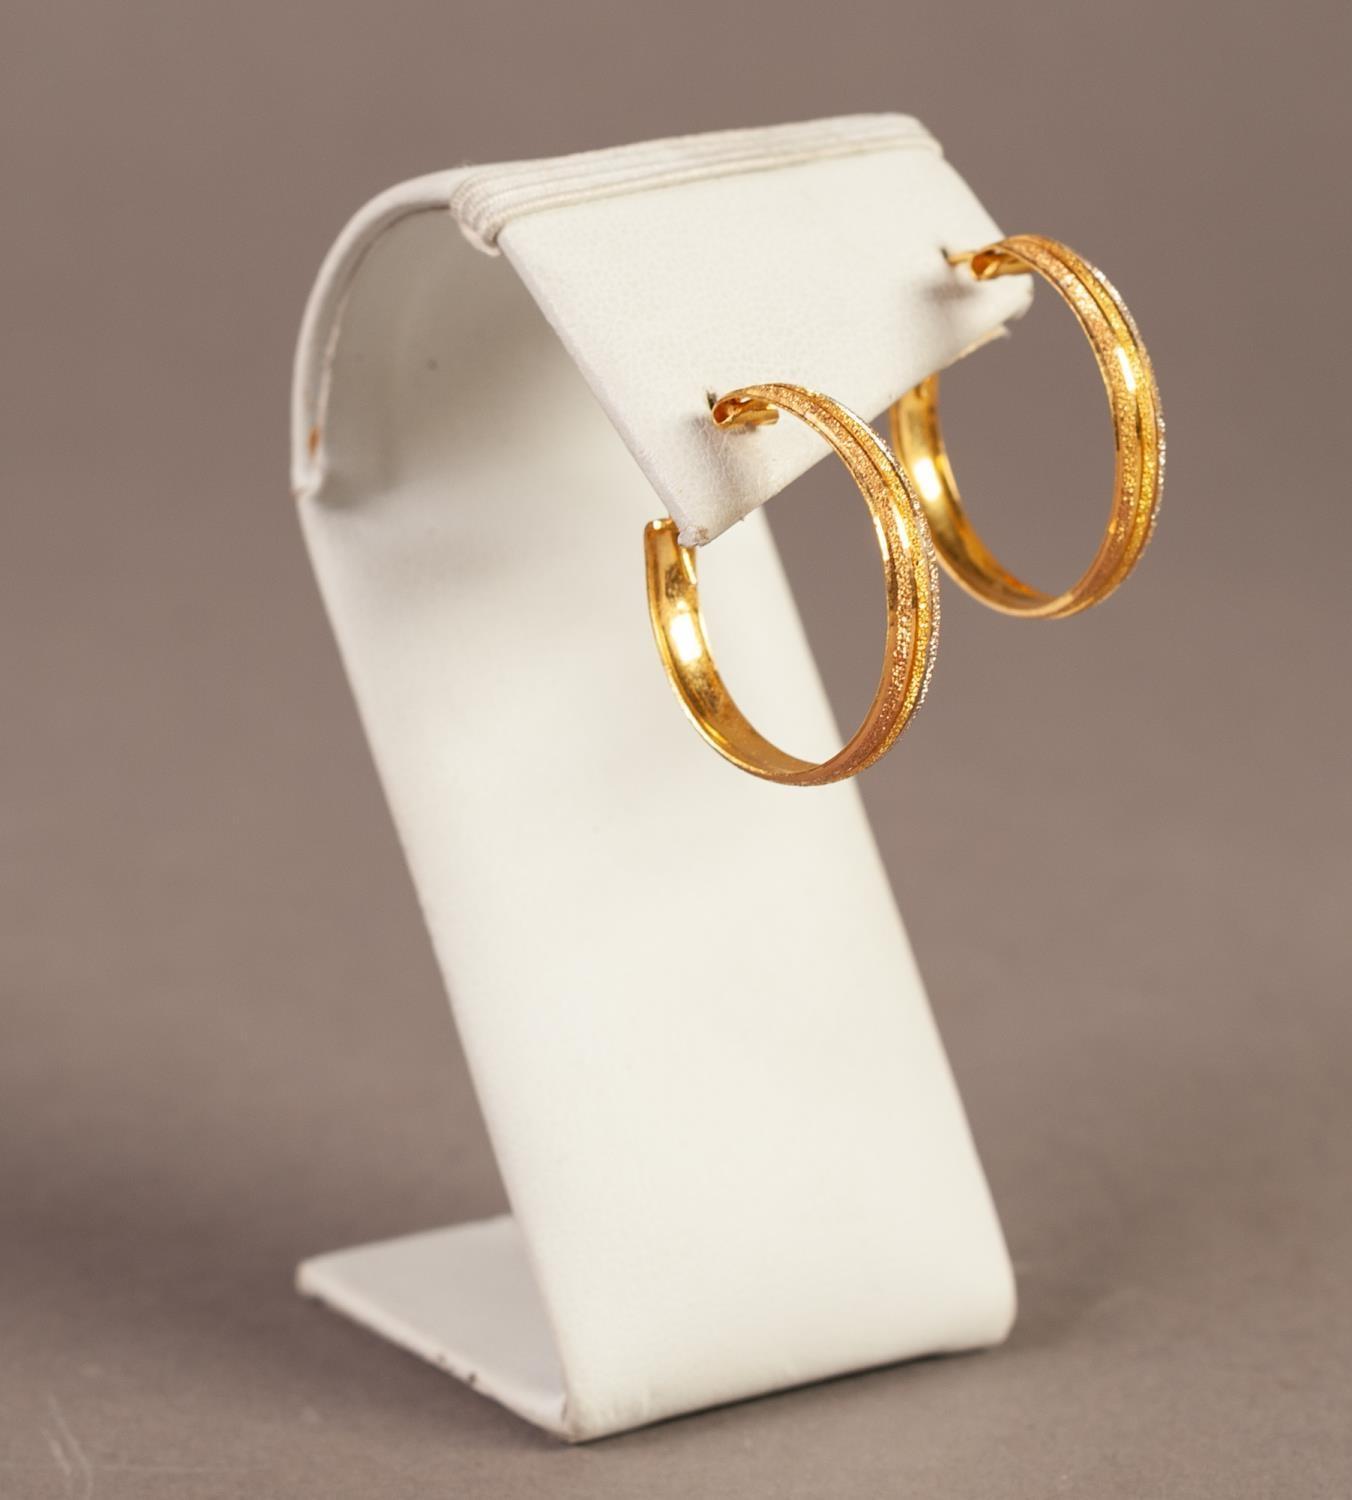 PAIR OF YELLOW AND WHITE THREE STRAND HOOP EARRINGS (stamped '916), 4.2gms - Image 2 of 2